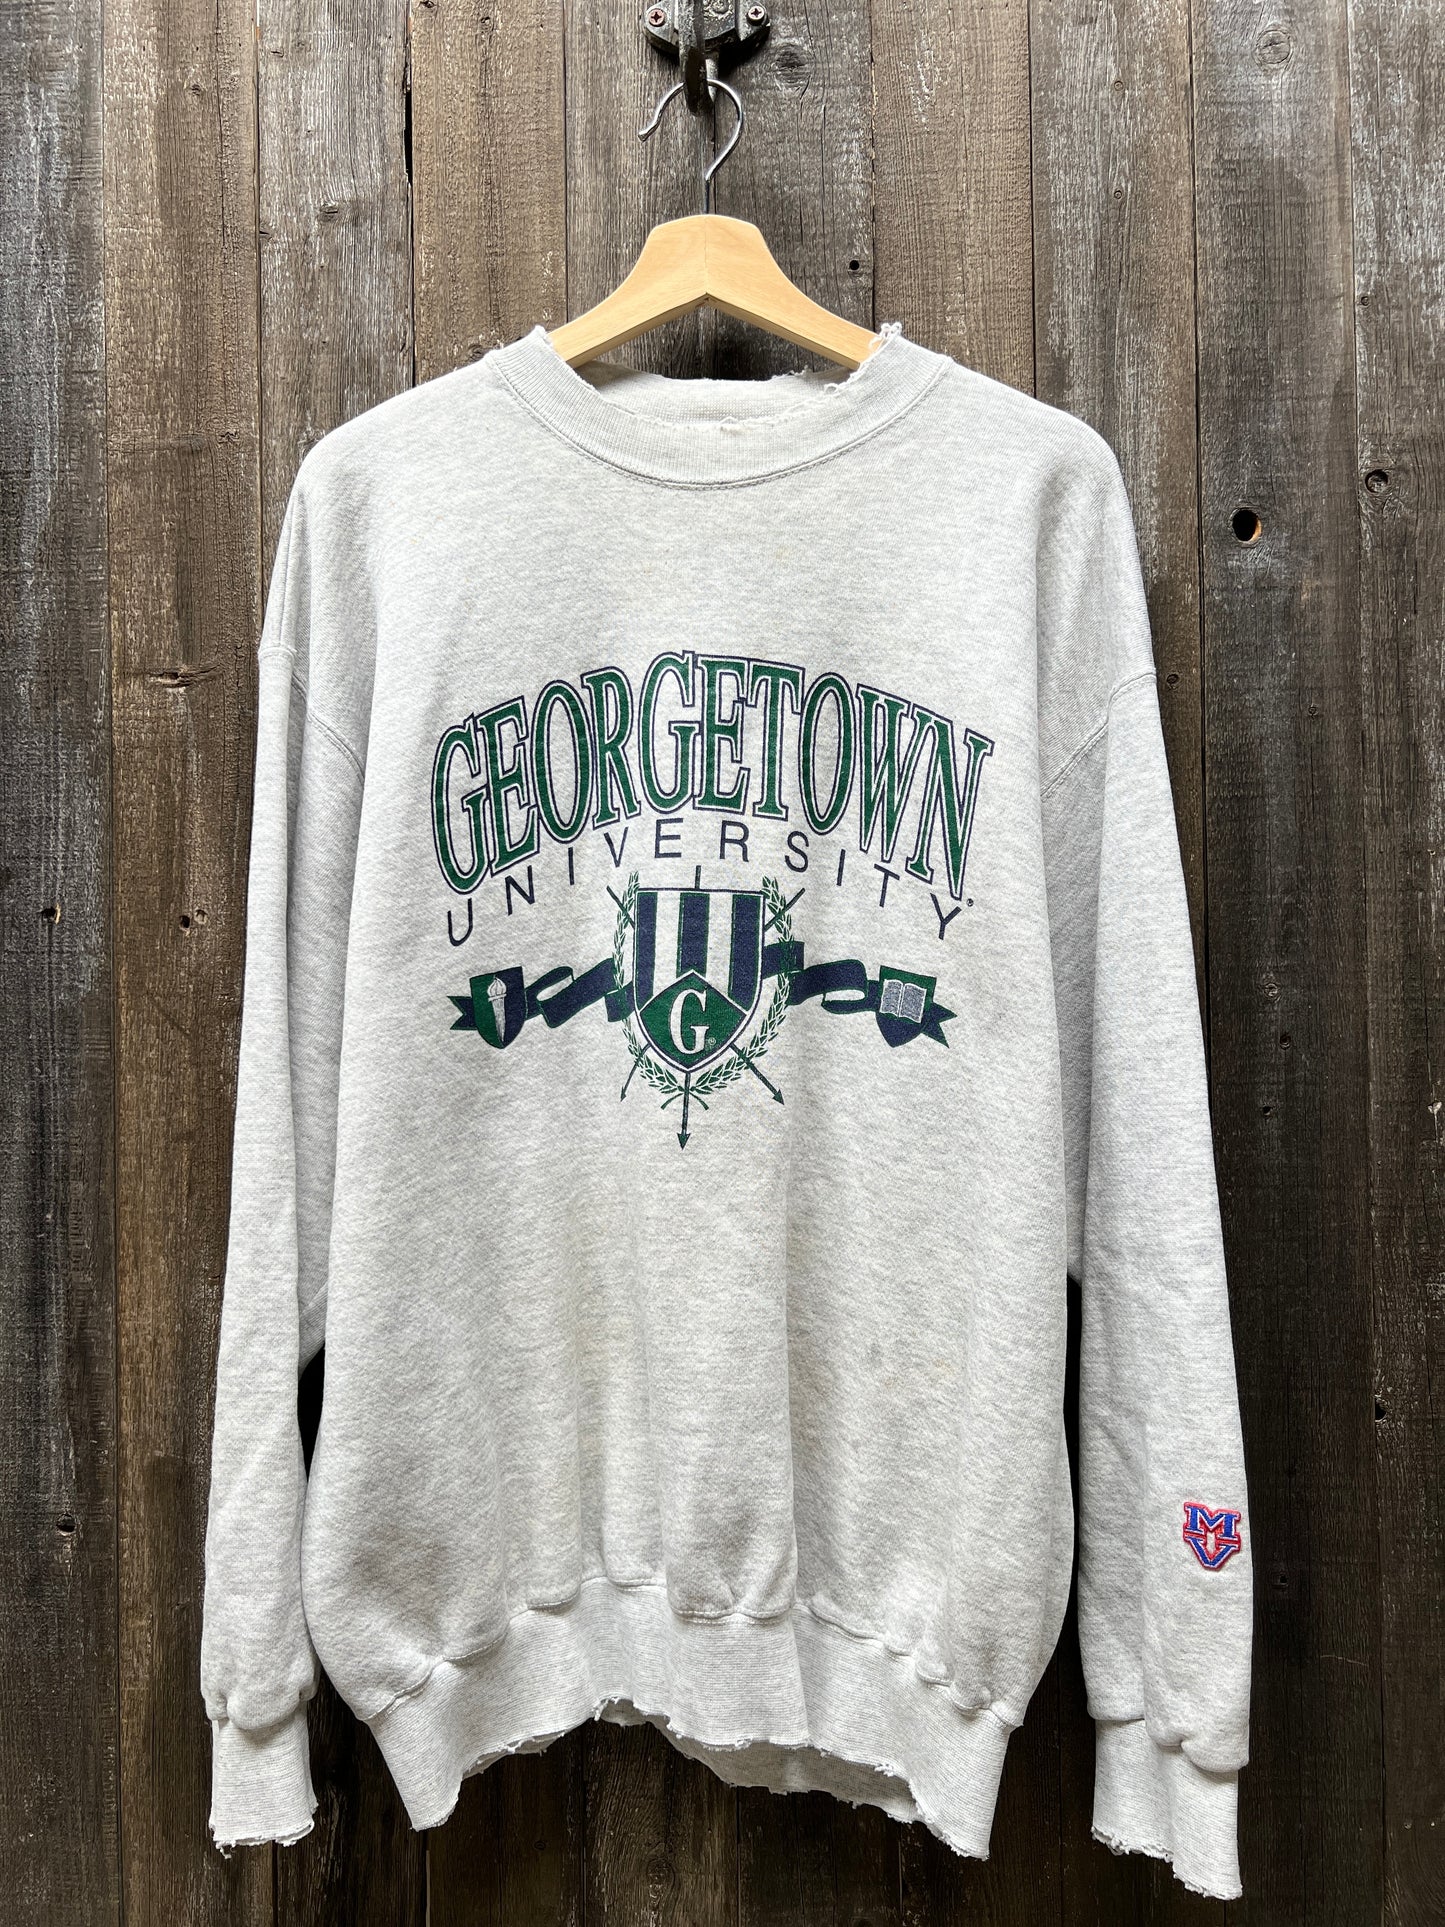 Georgetown Sweatshirt -XL-Customize Your Embroidery Wording